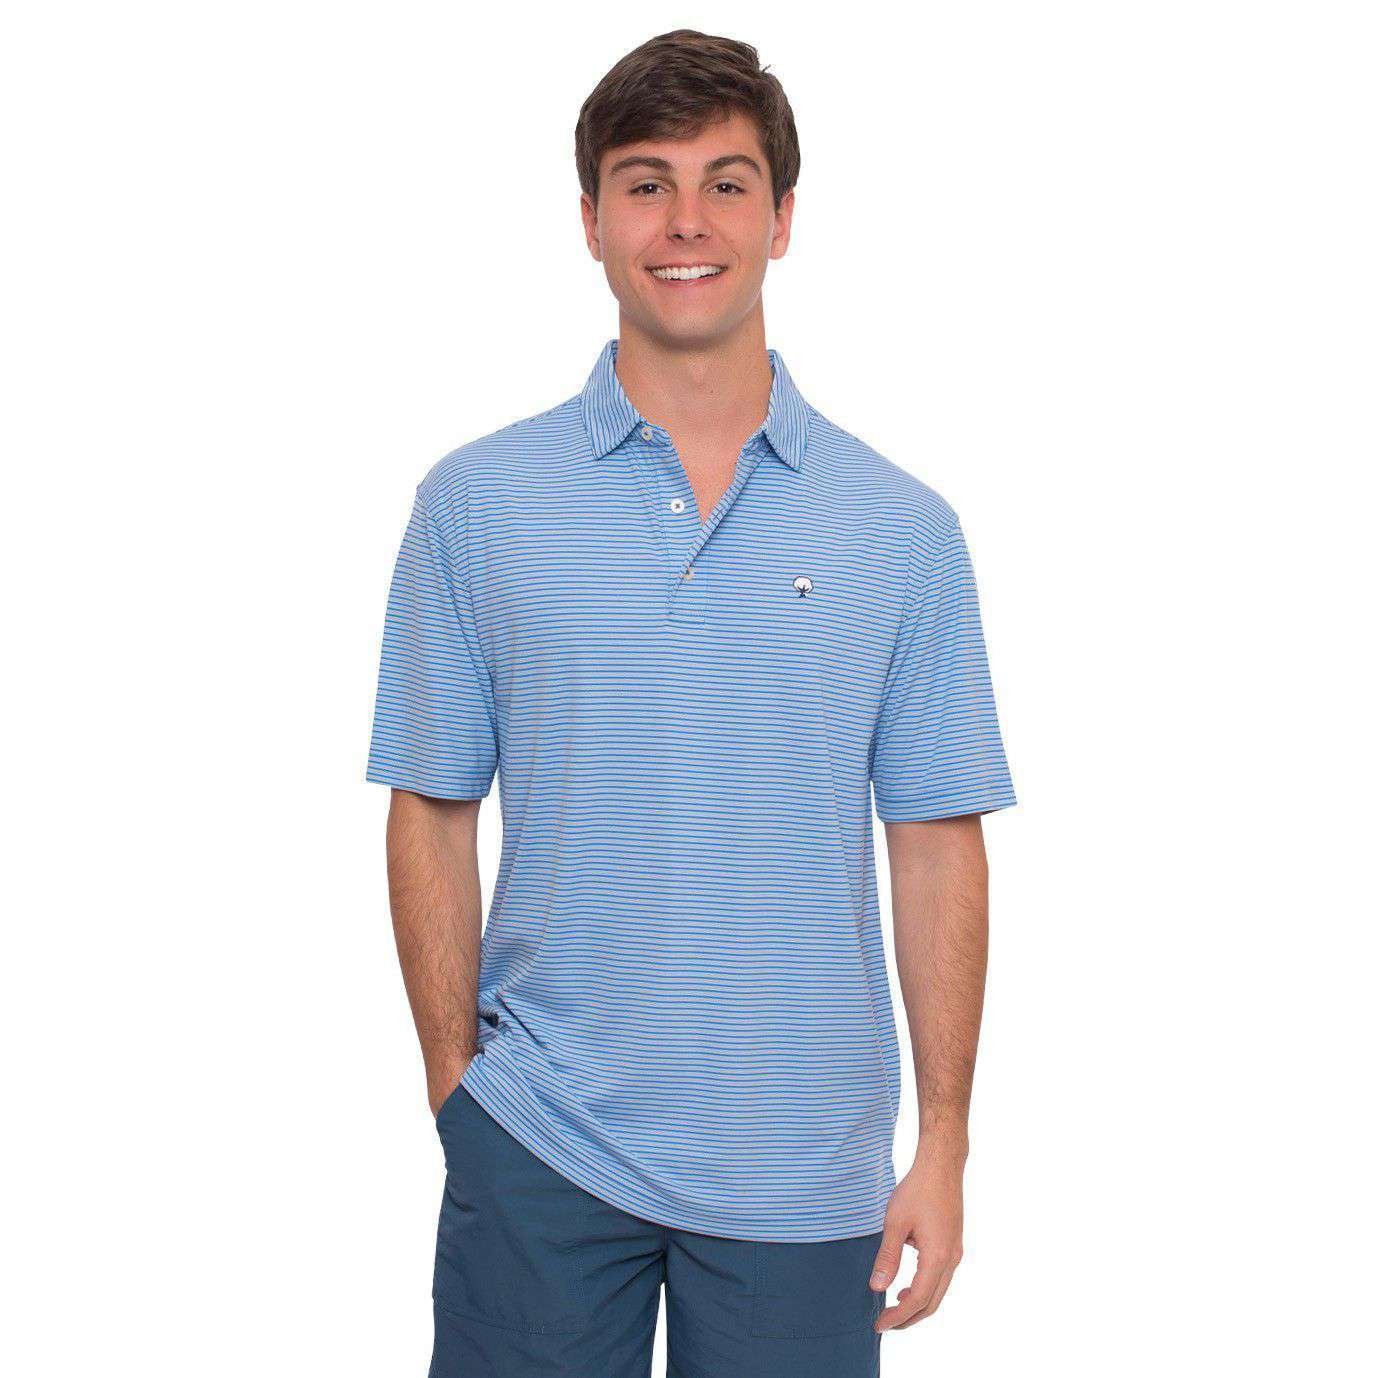 Andrews Performance Polo in Regatta Blue by The Southern Shirt Co. - Country Club Prep